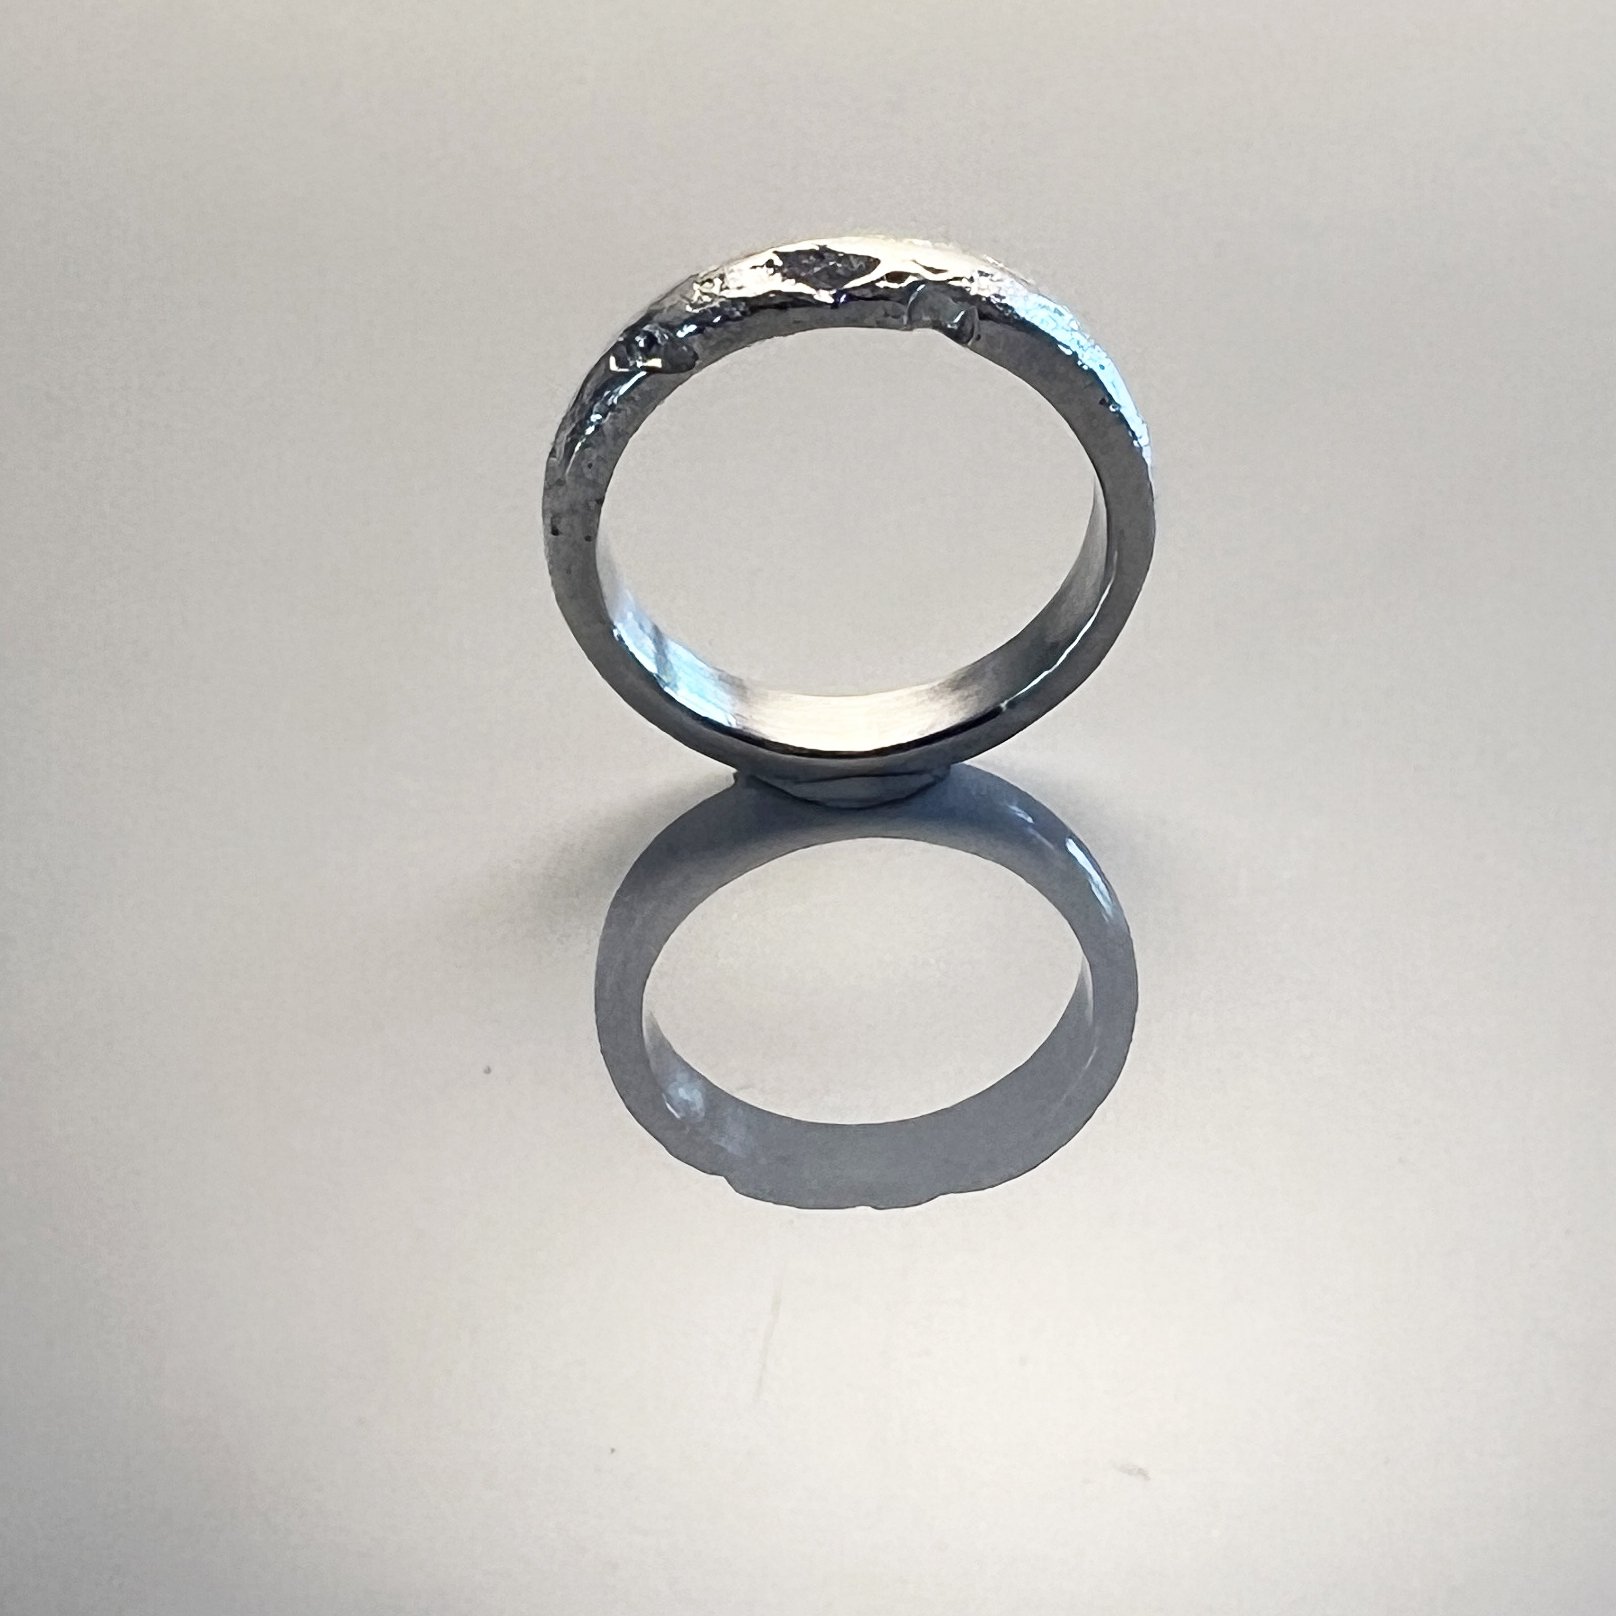 completed ring for G.jpg